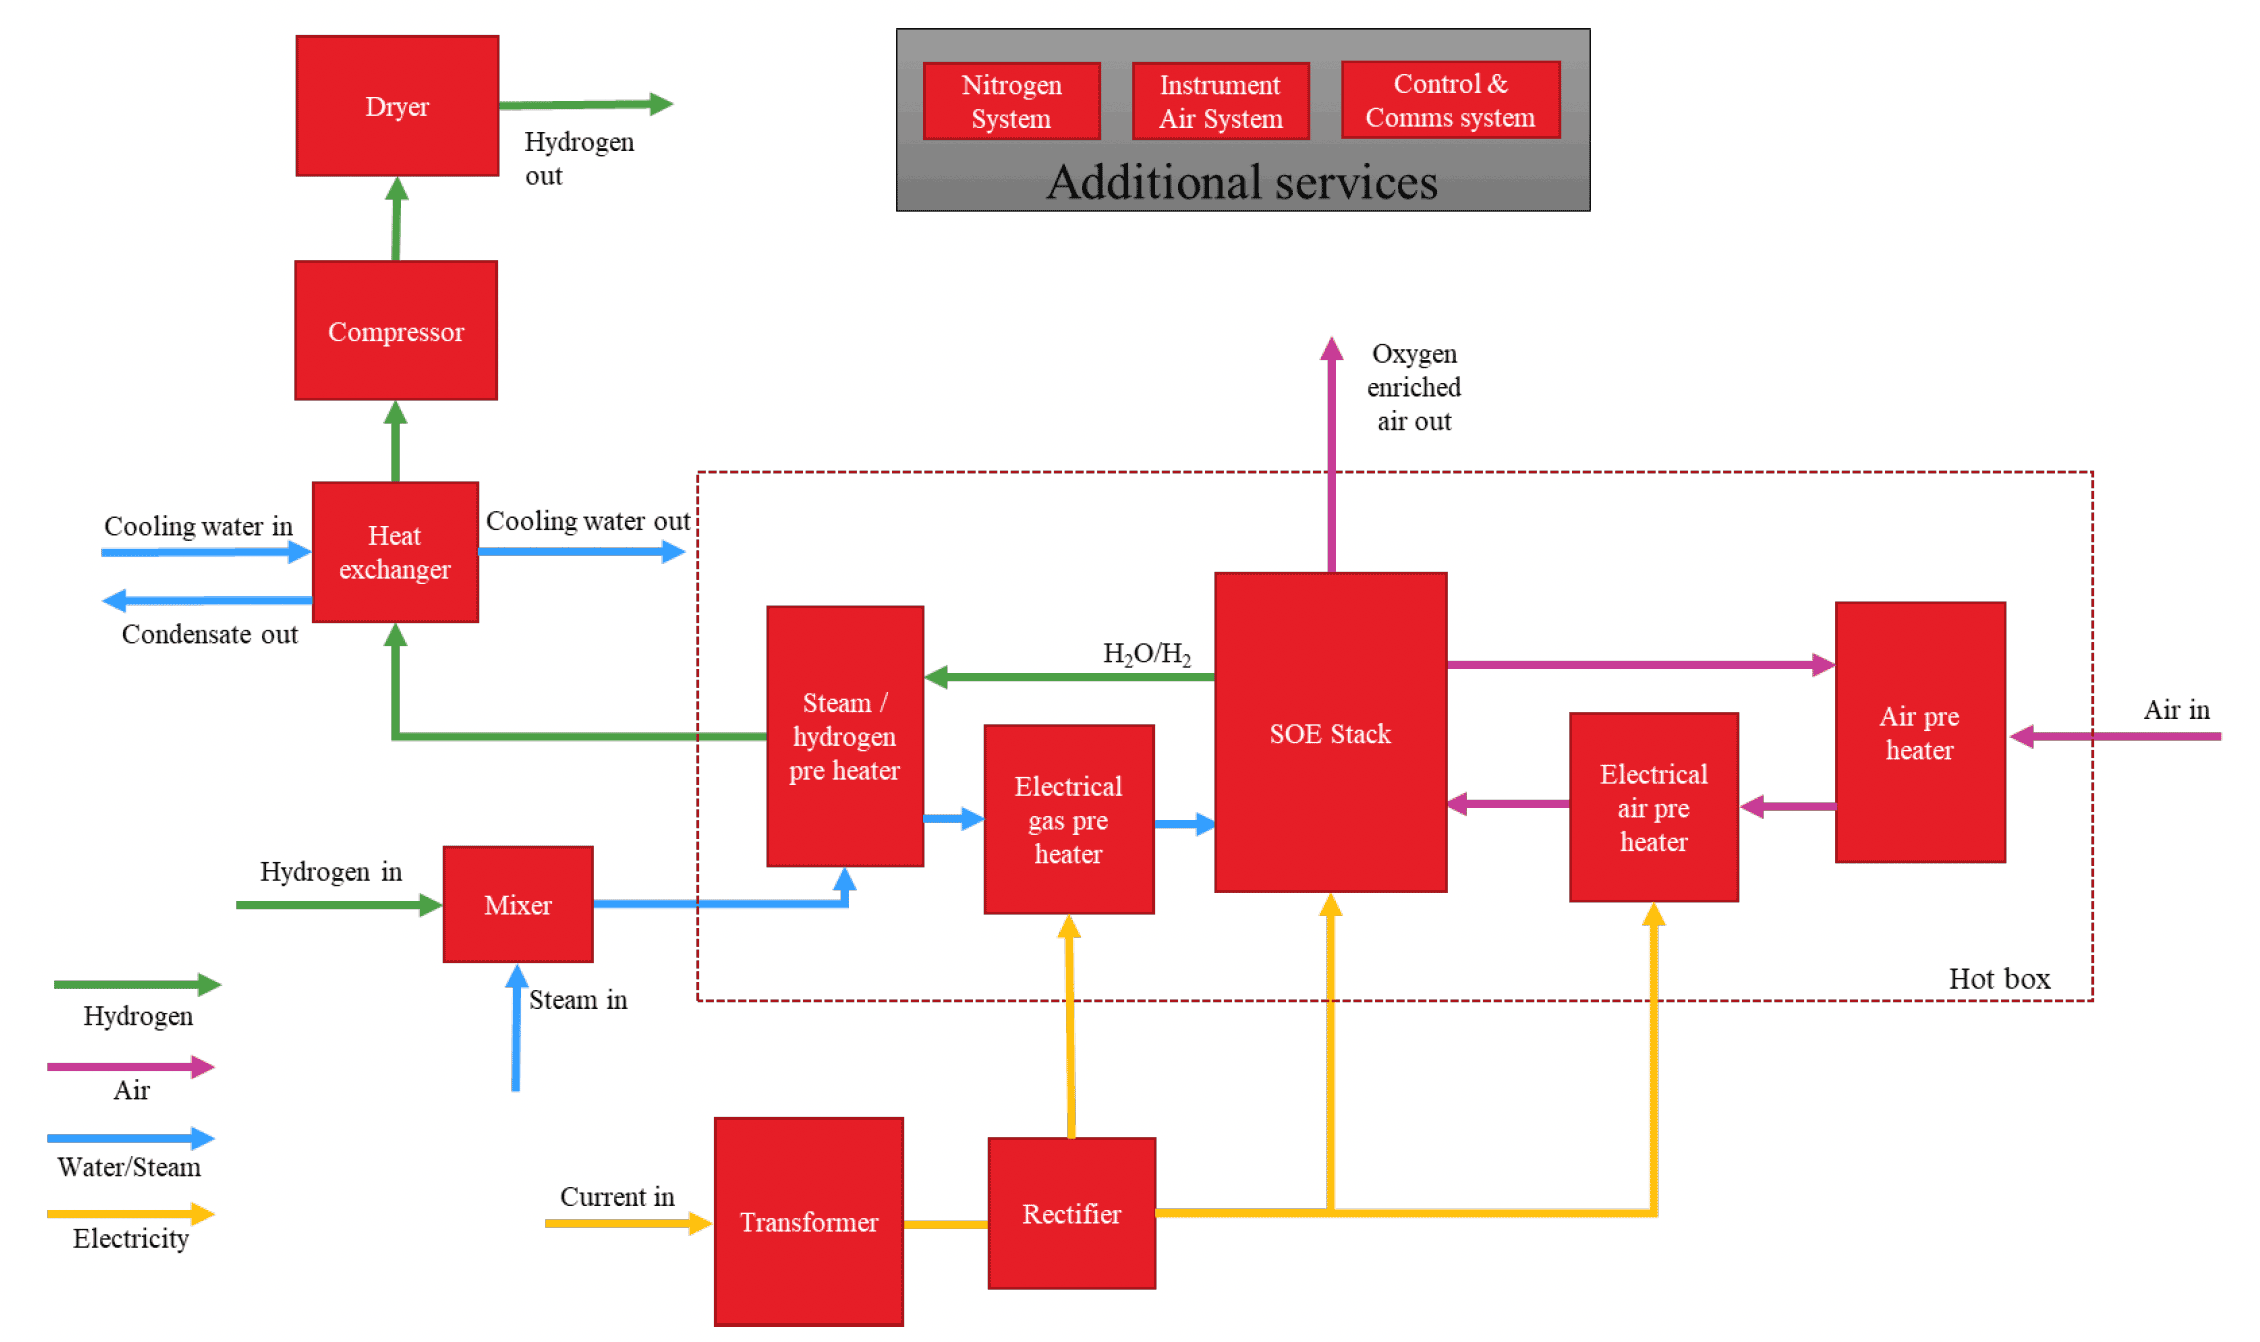 Solid oxide electrolyser process flow diagram. The system inputs are steam and water in light blue, electricity in yellow, excess hydrogen in green and air in pink. Steam passes through a mixer where it is mixed with hydrogen and then pre-heated before it reaches the stack. The electricity goes through a power management system before it reaches the stack. The air is pre-heated before it reaches the stack. The outputs are hydrogen in green and oxygen enriched air in pink. The hydrogen is purified and dried before output. The oxygen is vented. The hydrogen is also cooled prior to output using a water cooled heat exchanger.